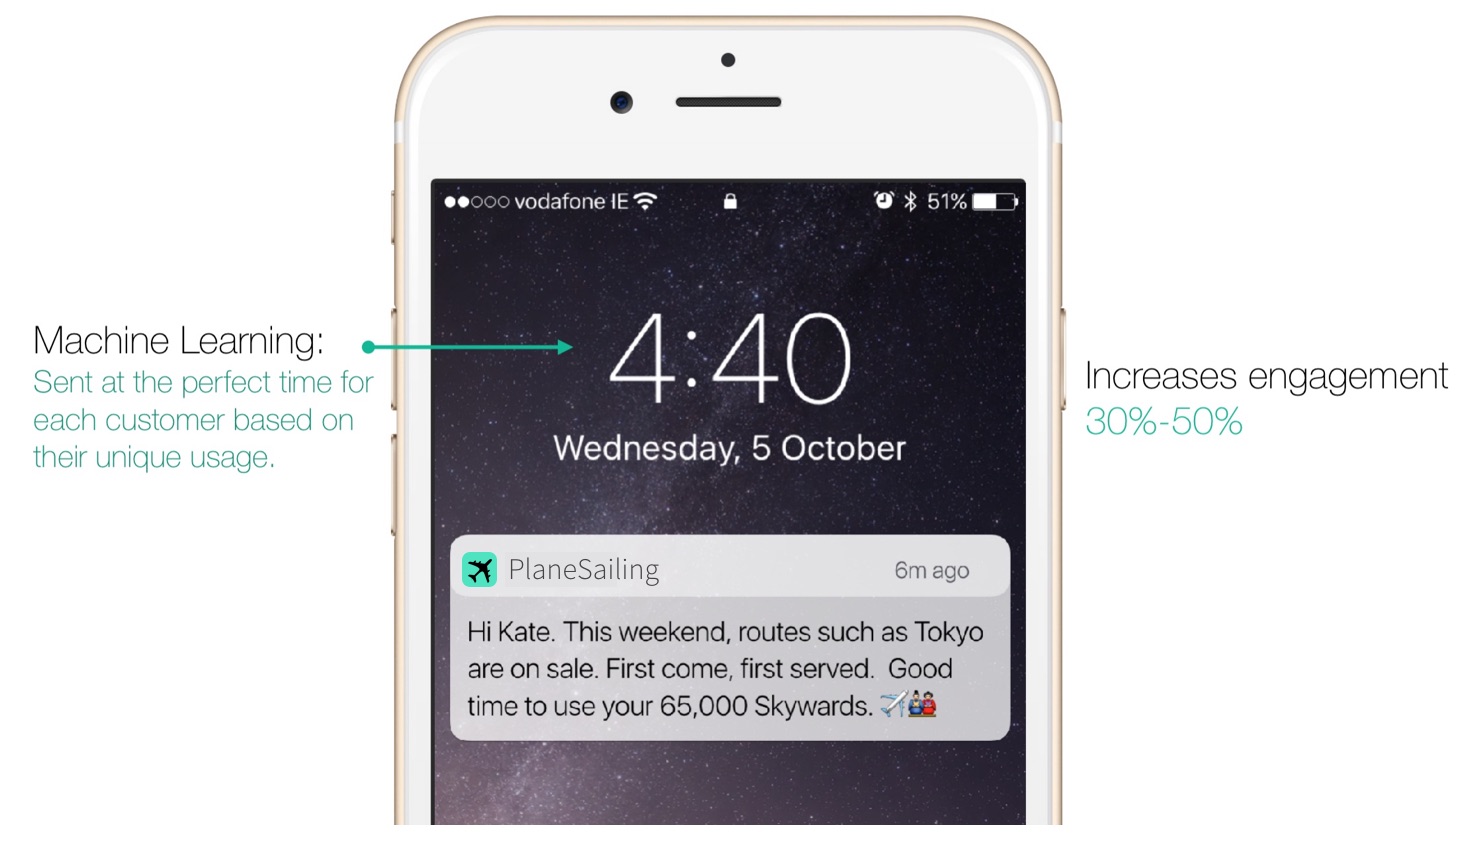 Machine learning improves timing of push notifications, increasing engagement